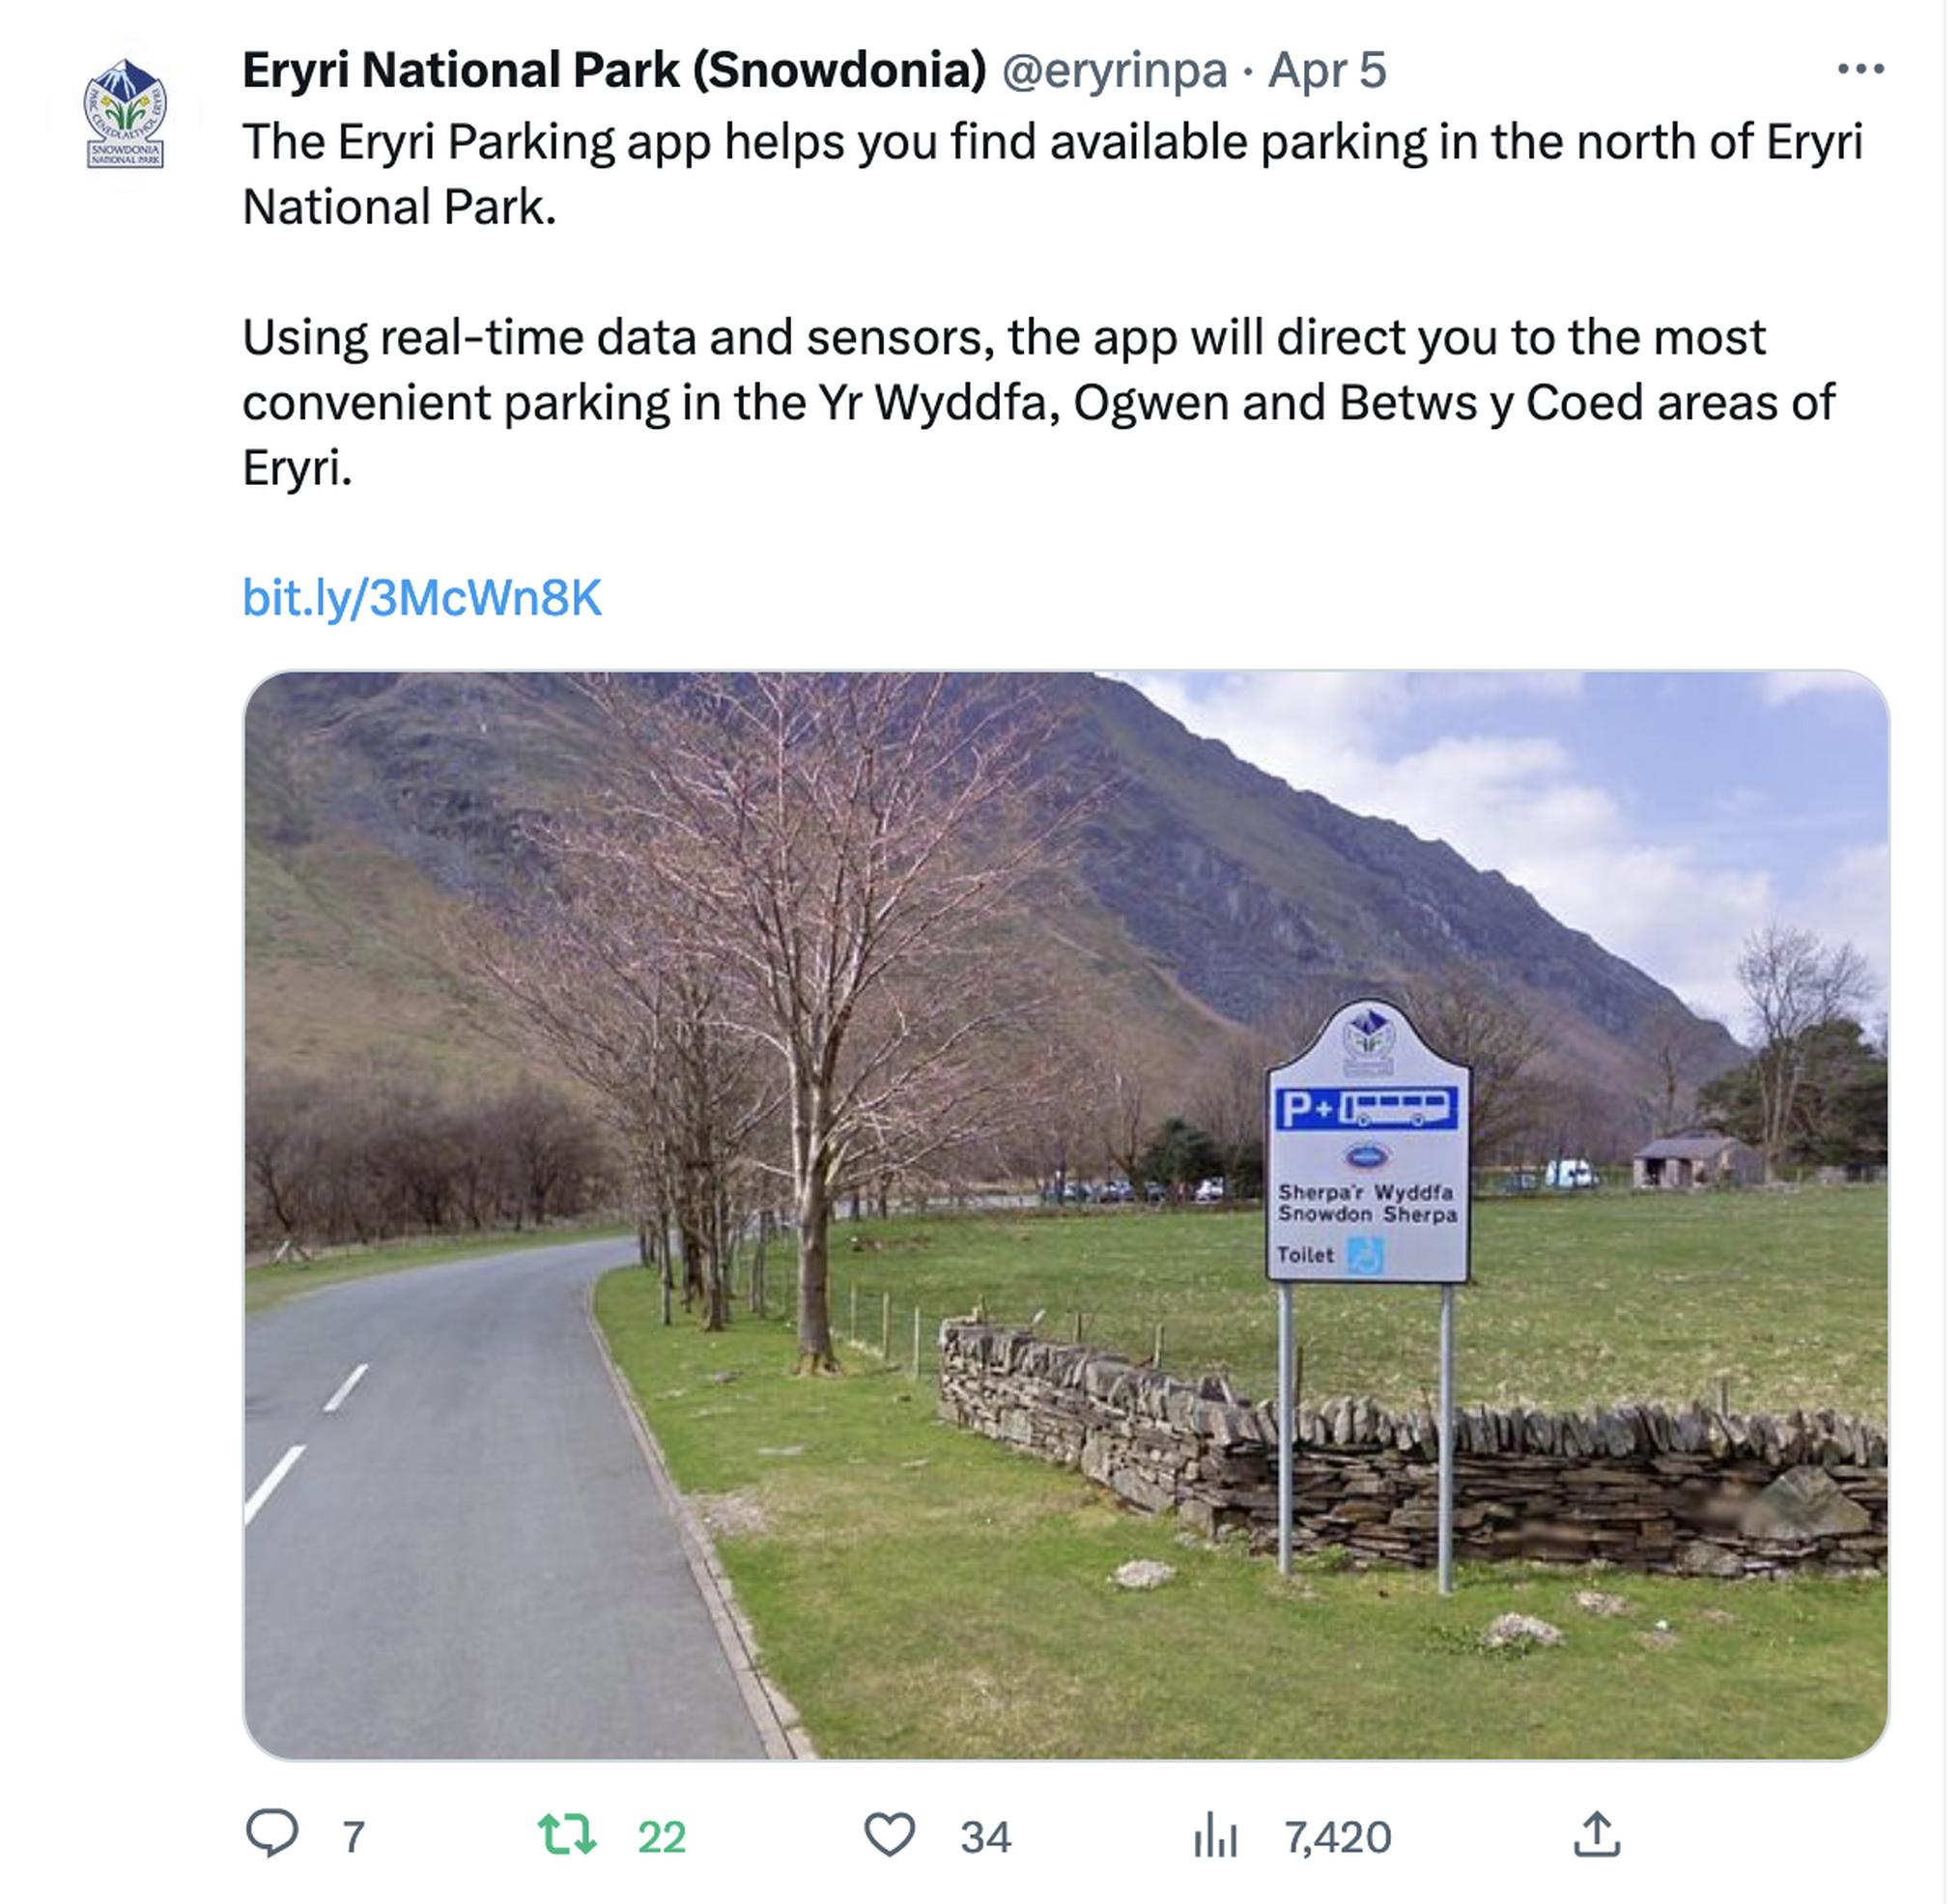 Eryri National Park has been using social media to advice visitors of the legal parking options available when visiting the area